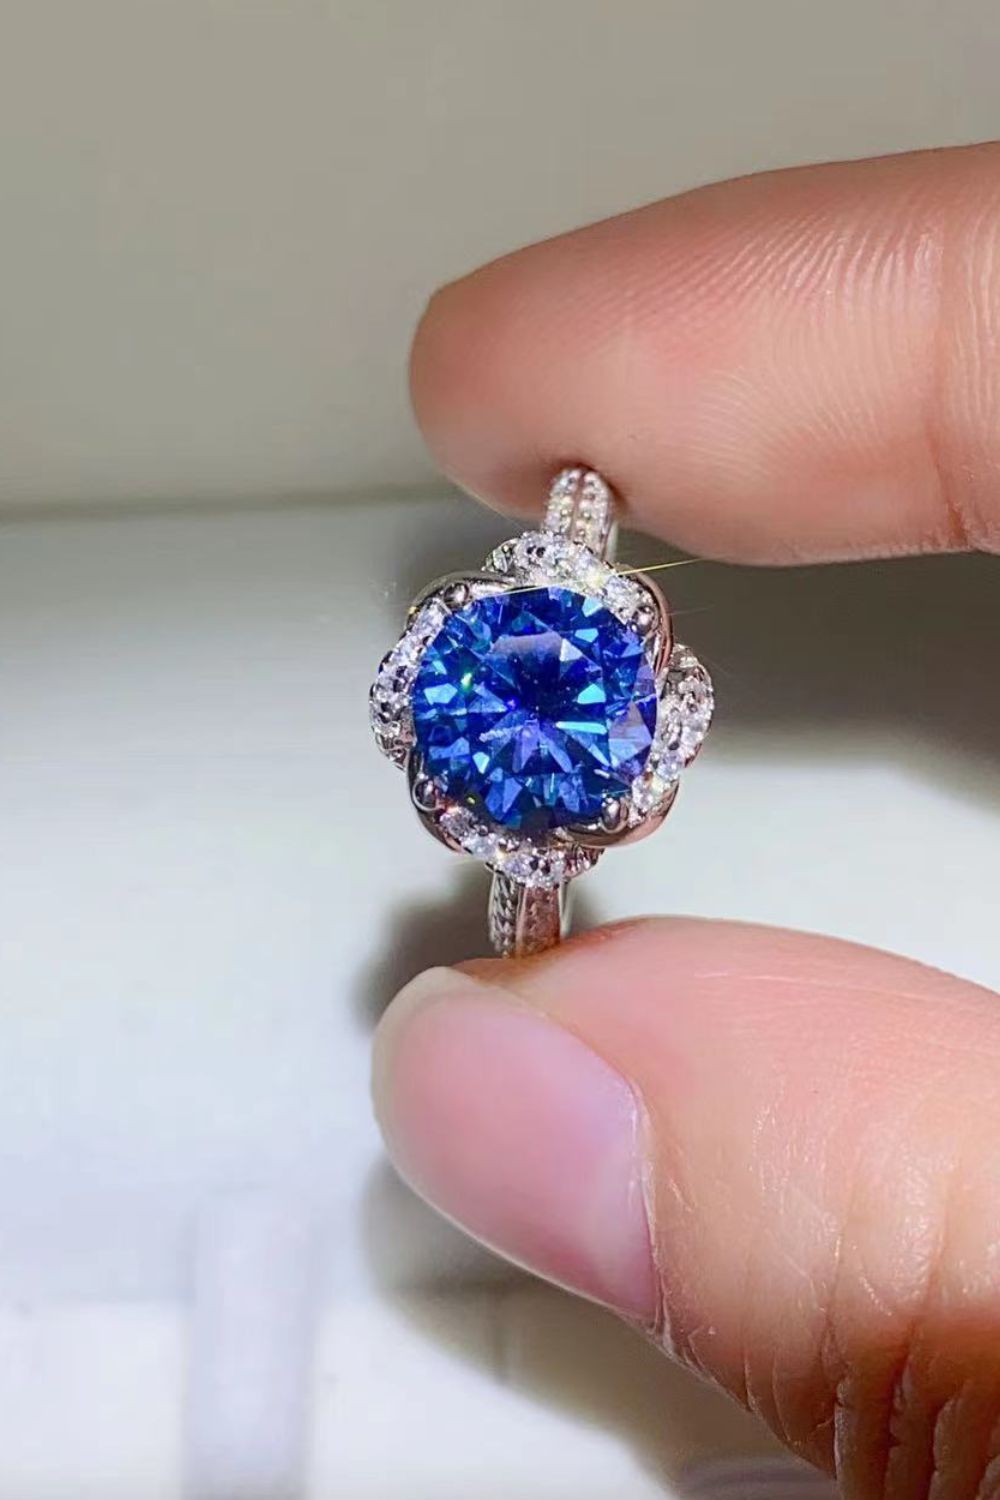 2 Carat Cobalt Blue Moissanite 925 Sterling Silver Ring-Rings-Inspired by Justeen-Women's Clothing Boutique in Chicago, Illinois